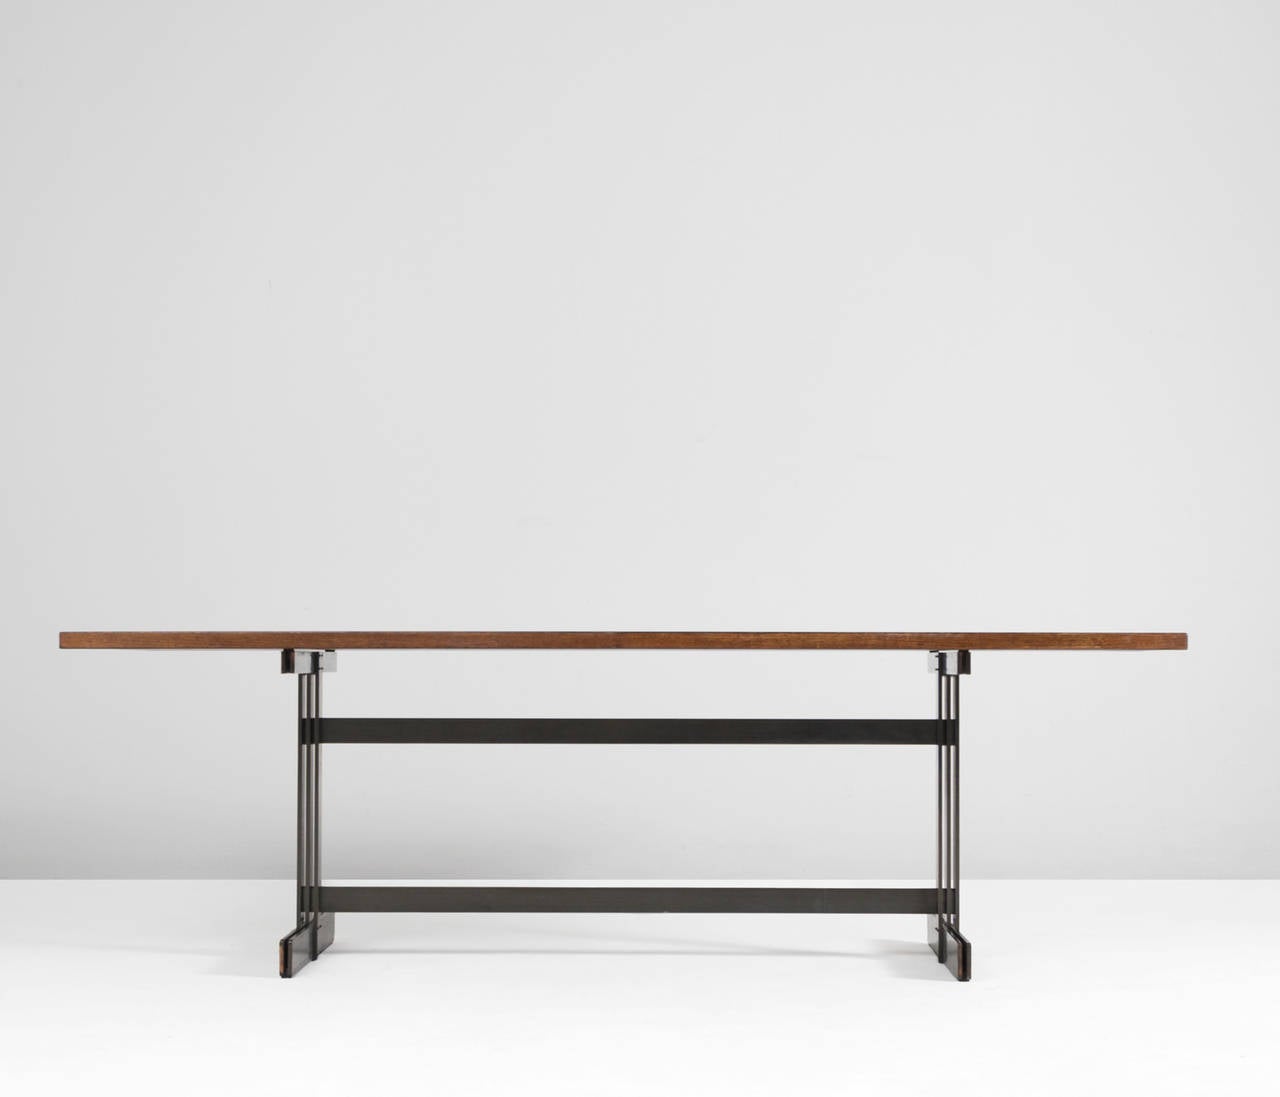 Large table, table Tonneau, with a solid wengé table top, composed of slats of wenge wood. The tightly designed solid gunmetal base compliments this perfectly. Looking at this details and design concludes the most possible care and craftsmanship.